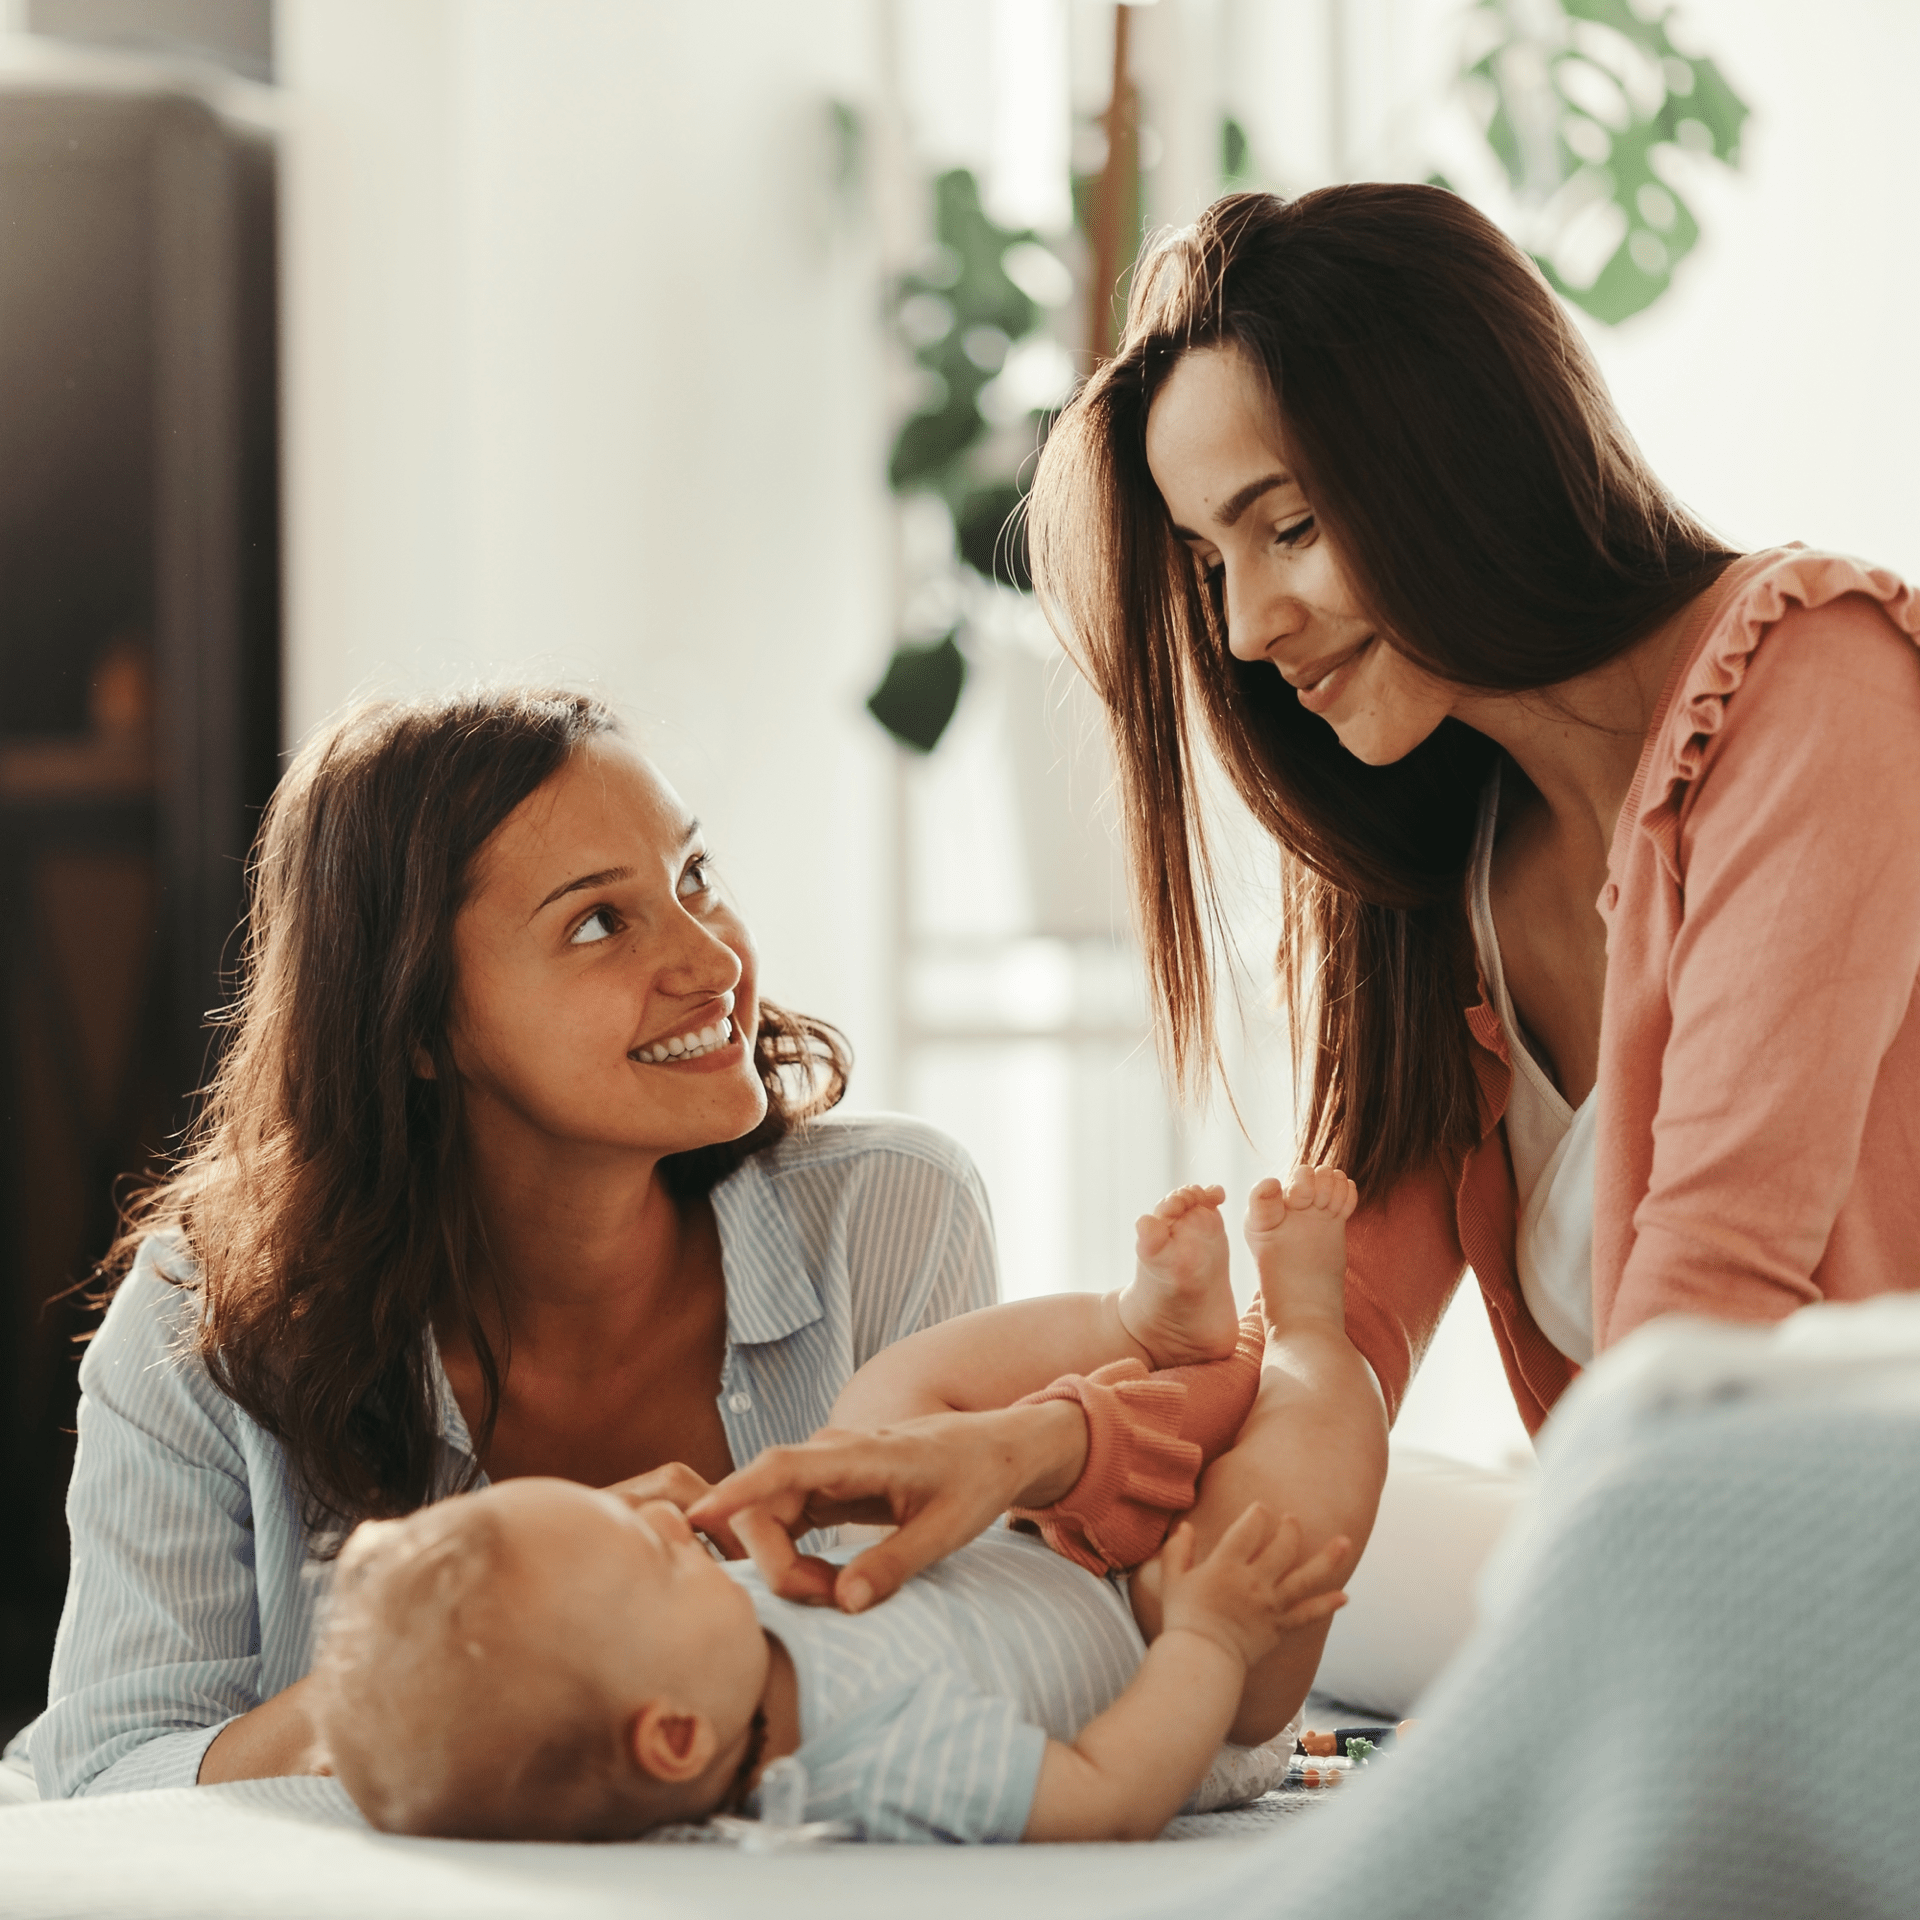 Two happy women having fun with their baby at home